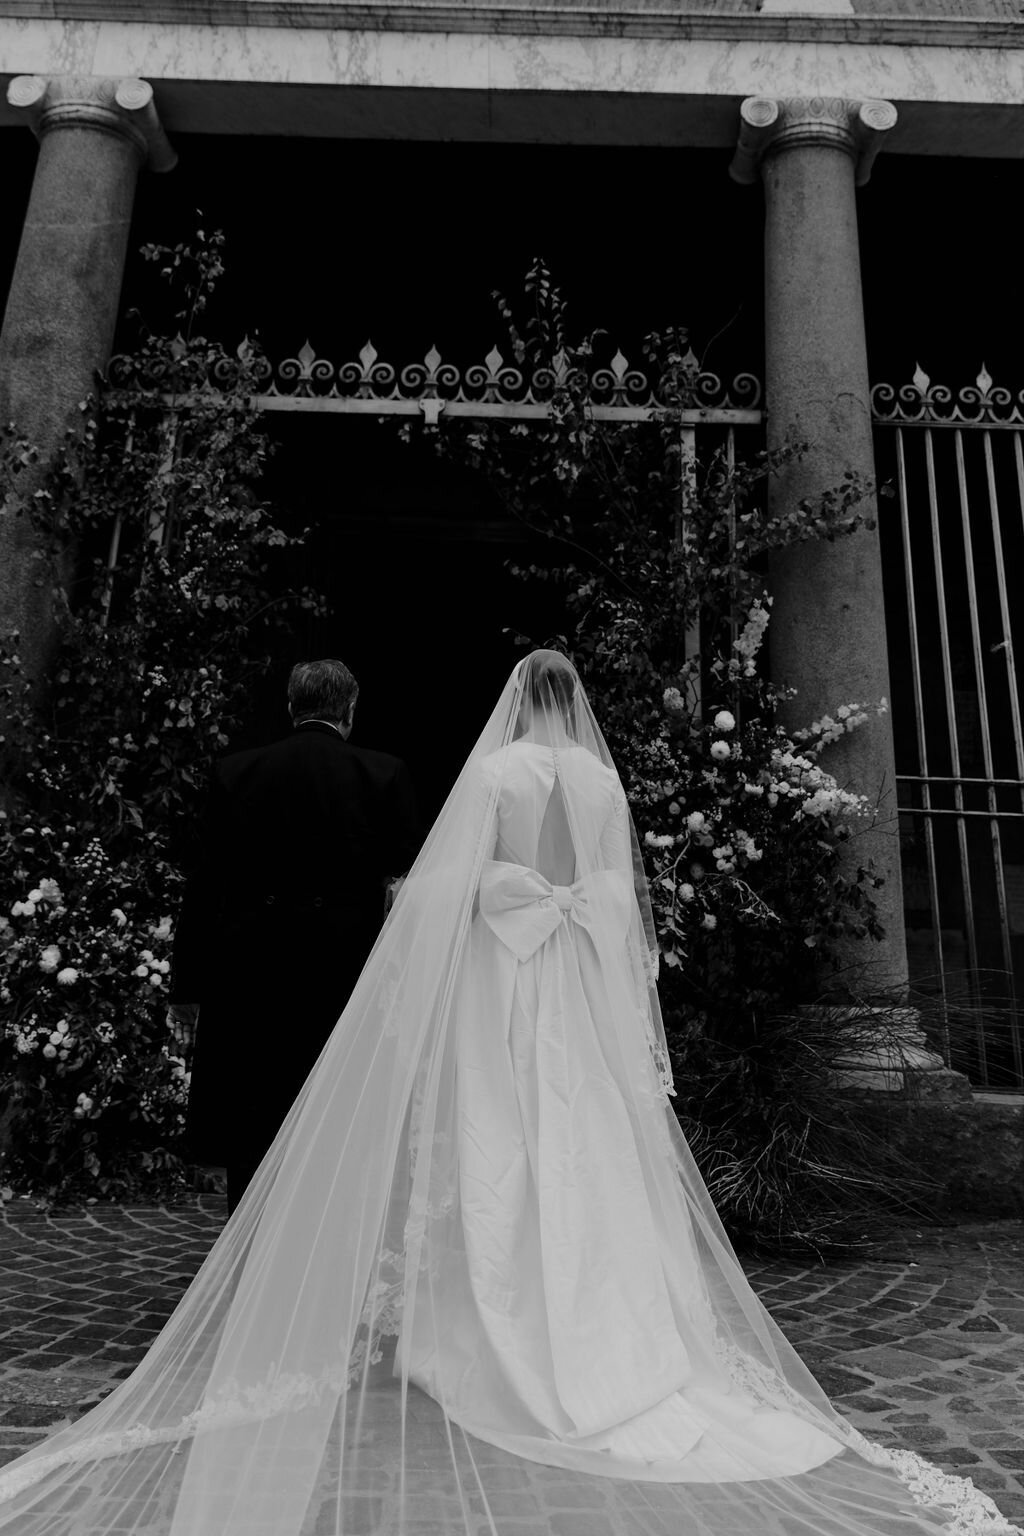 🤍 REAL WEDDING: Anna &amp; Giorgio's romantic Roman wedding 🤍

&ldquo;A year before the wedding, my mother brought down her 1989 silk taffeta wedding dress from the attic. We had never seen it before as she believed it had been ruined by the dry cl